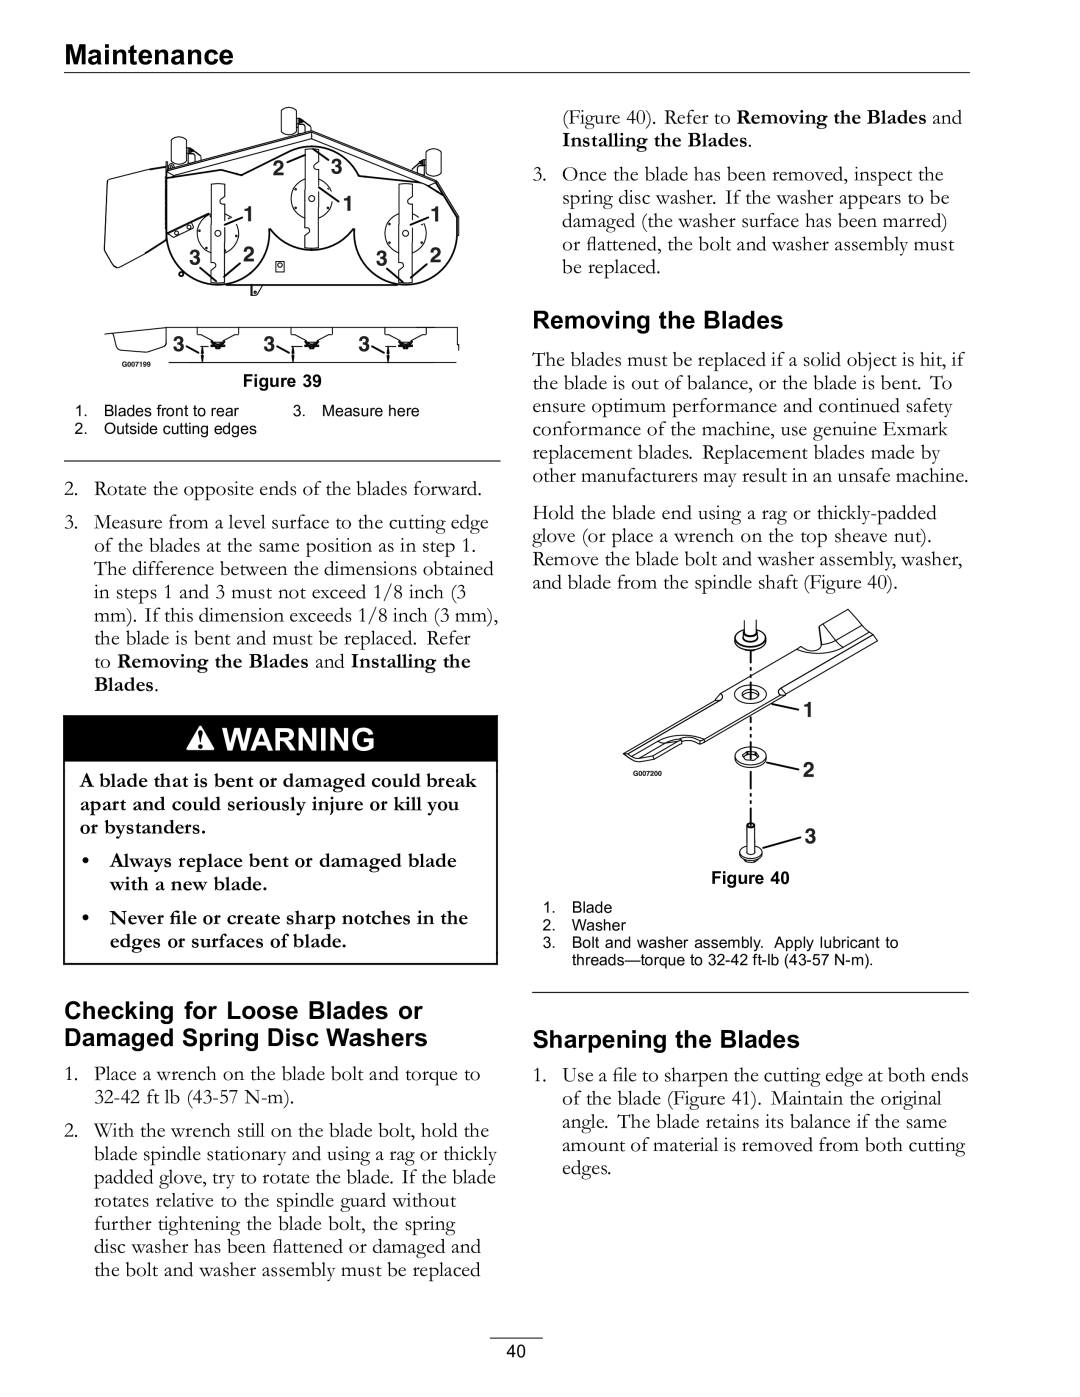 Exmark Lawn Mower manual Removing the Blades, Sharpening the Blades 